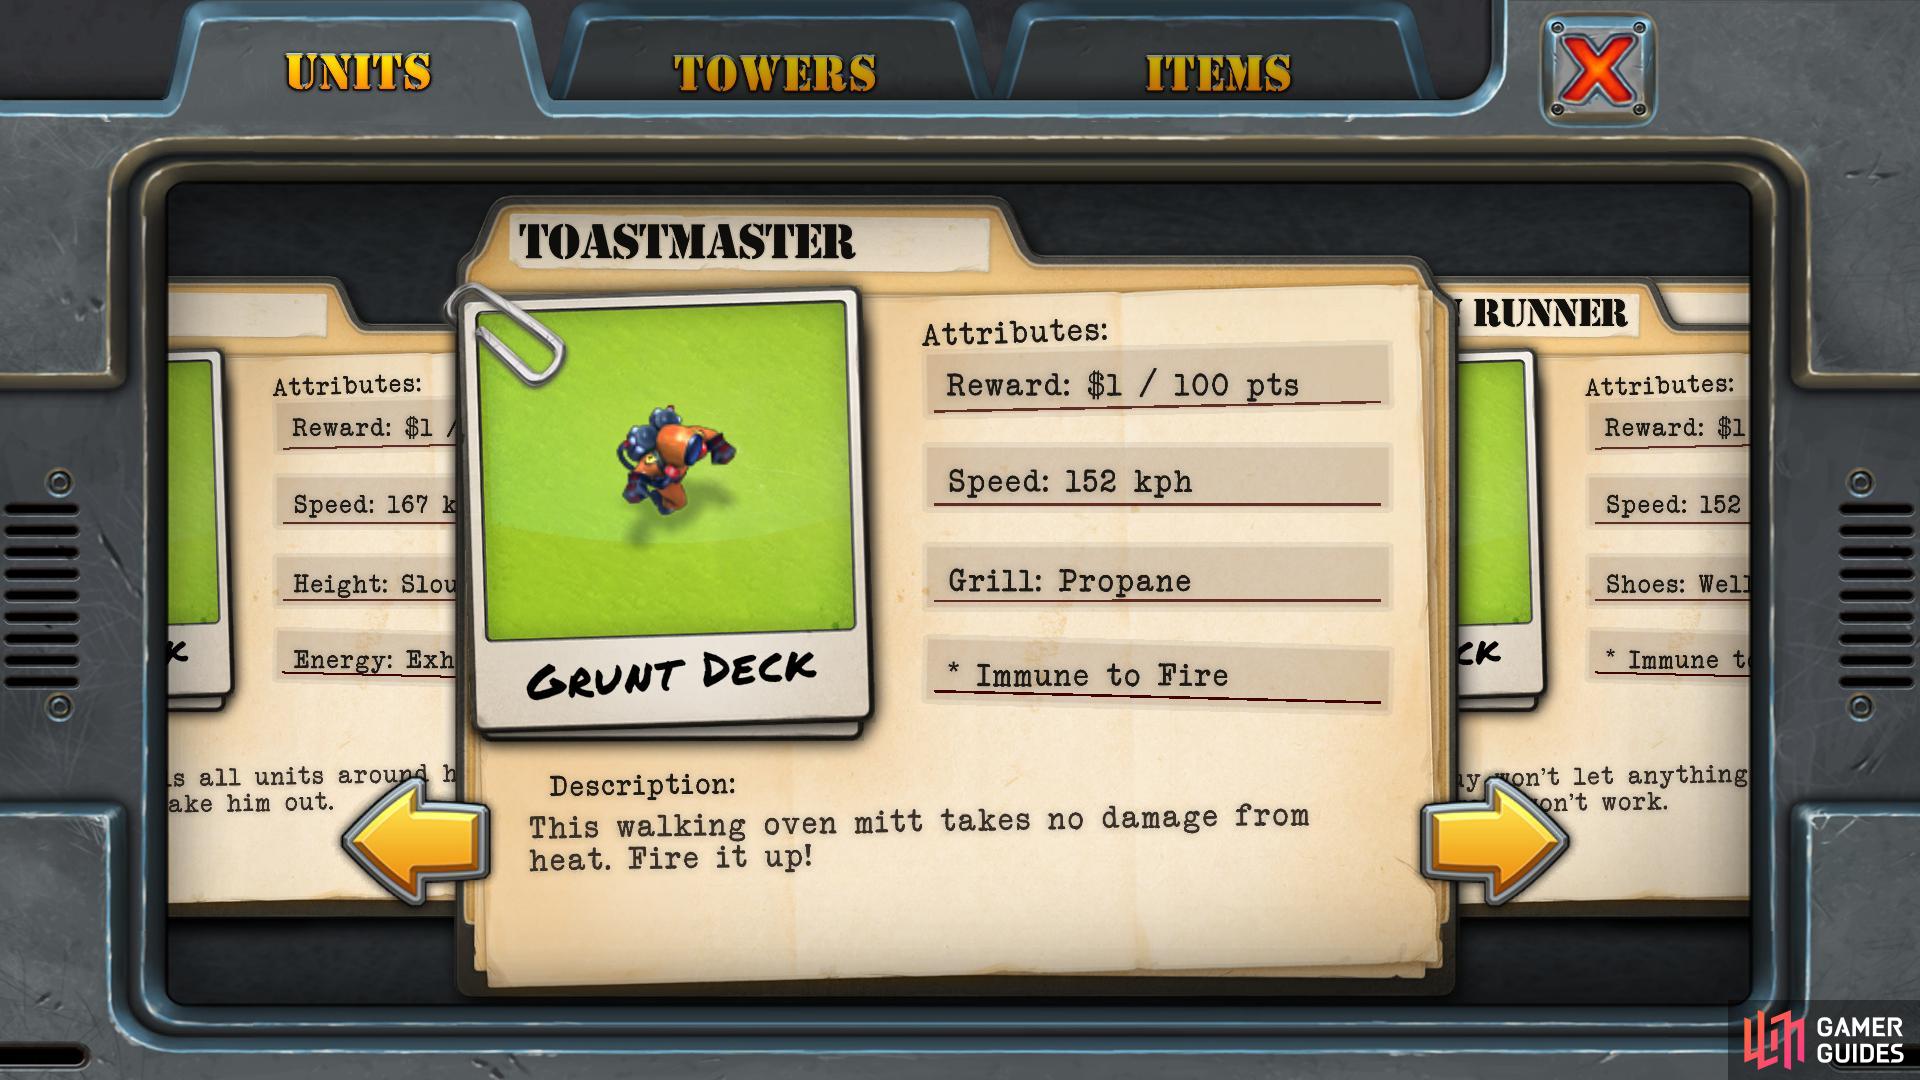 Each of the non-vehicle based units below contribute towards completing the 'Grunt Deck' achievements/cards.